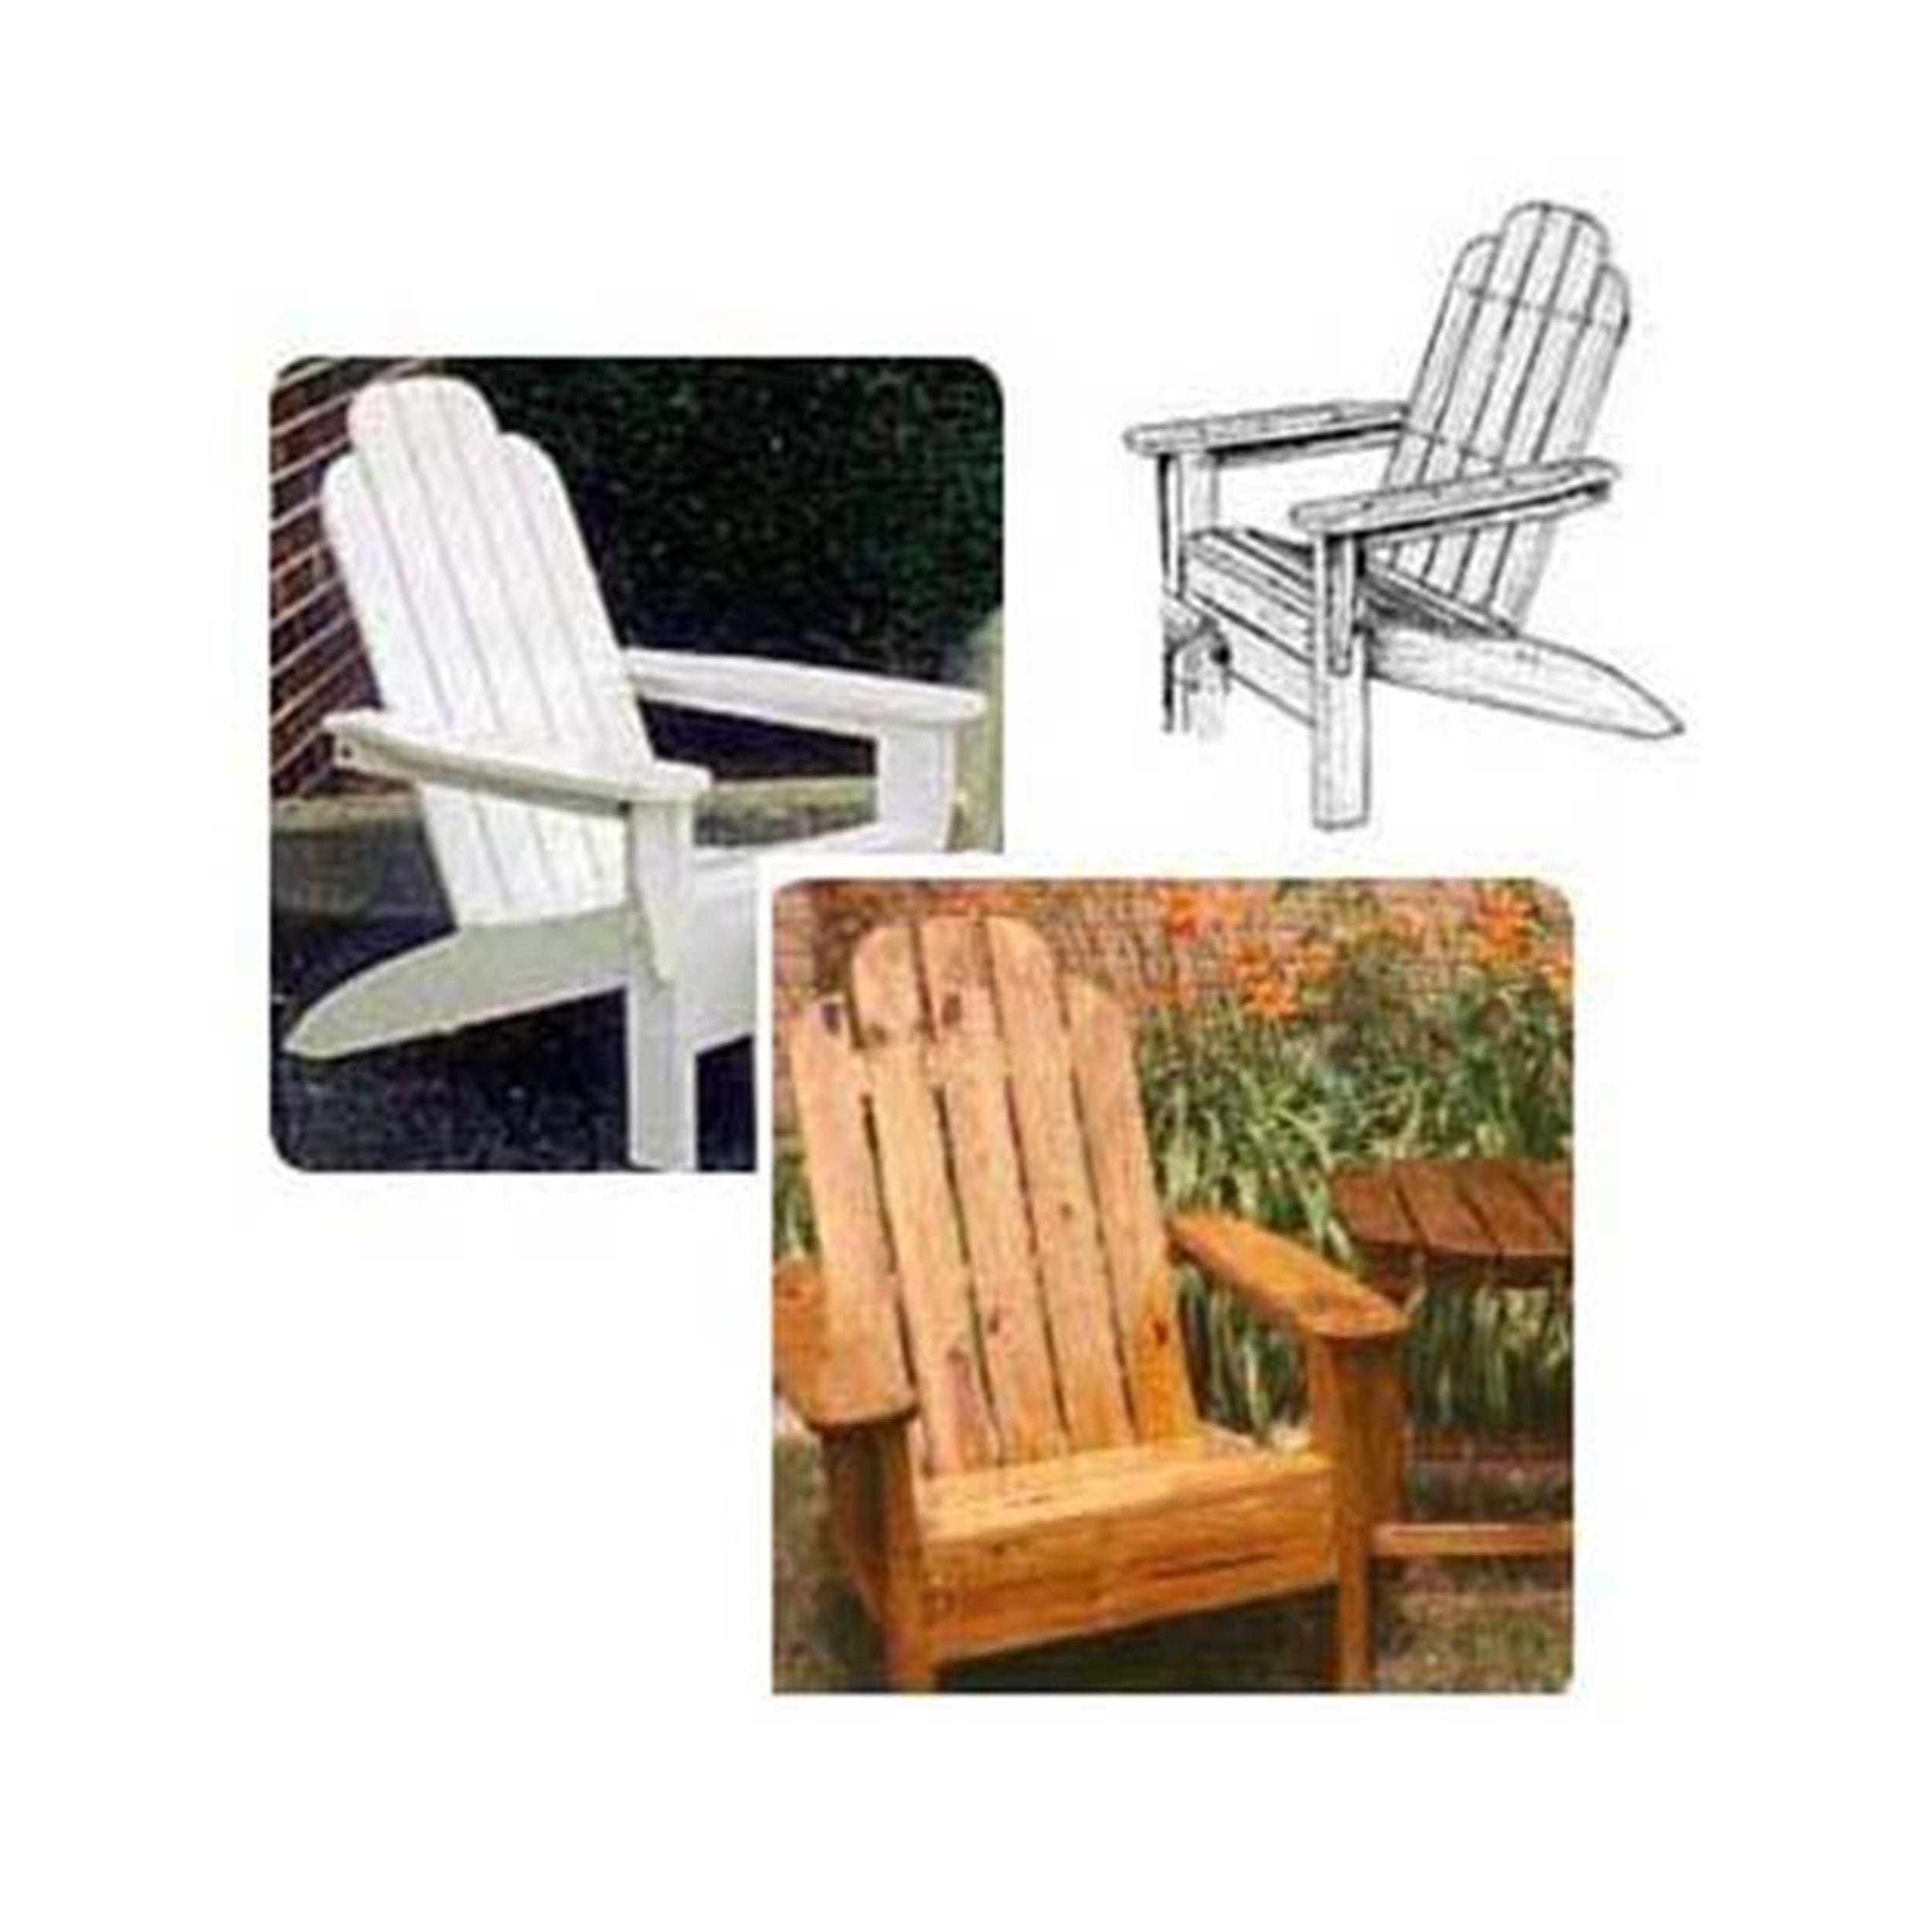 Woodworking Project Paper Plan to Build Folding Adirondack Chair 